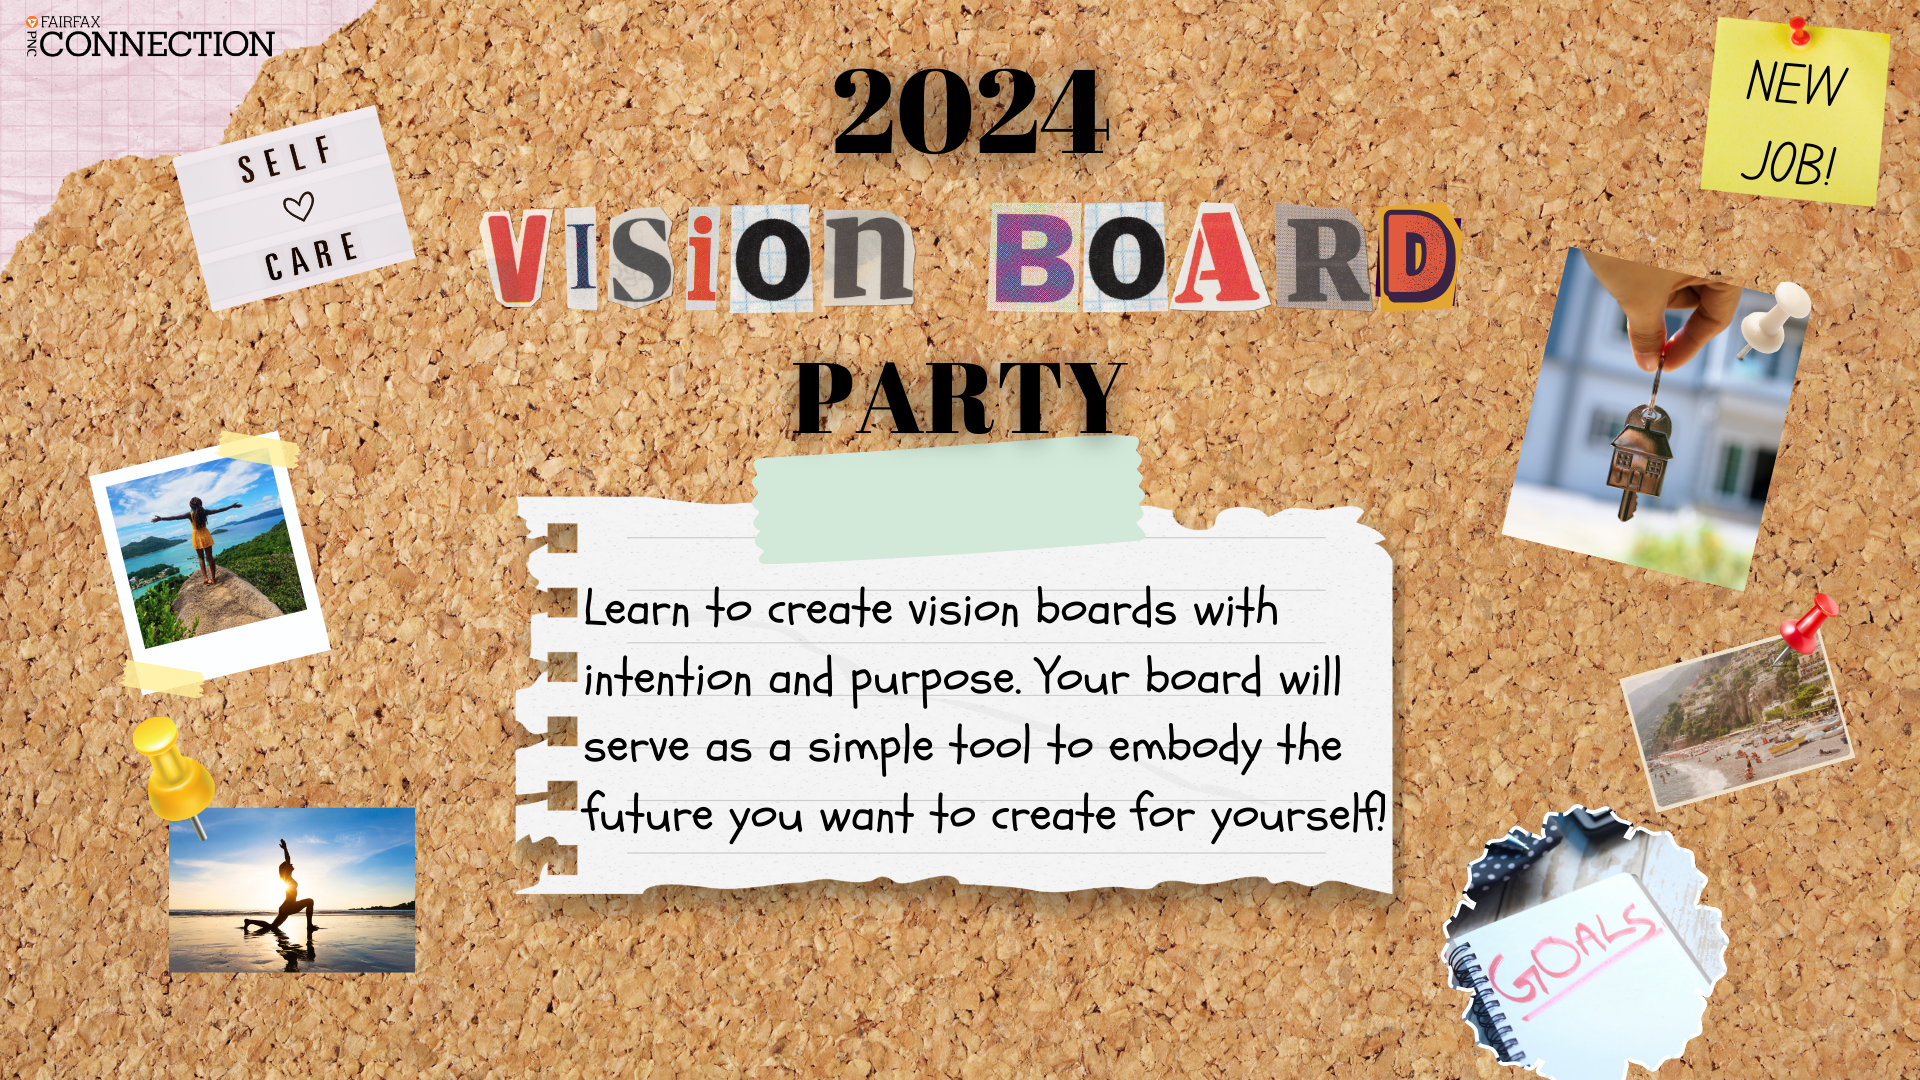 VISION BOARD PARTY  Idell McCarthy Fdn